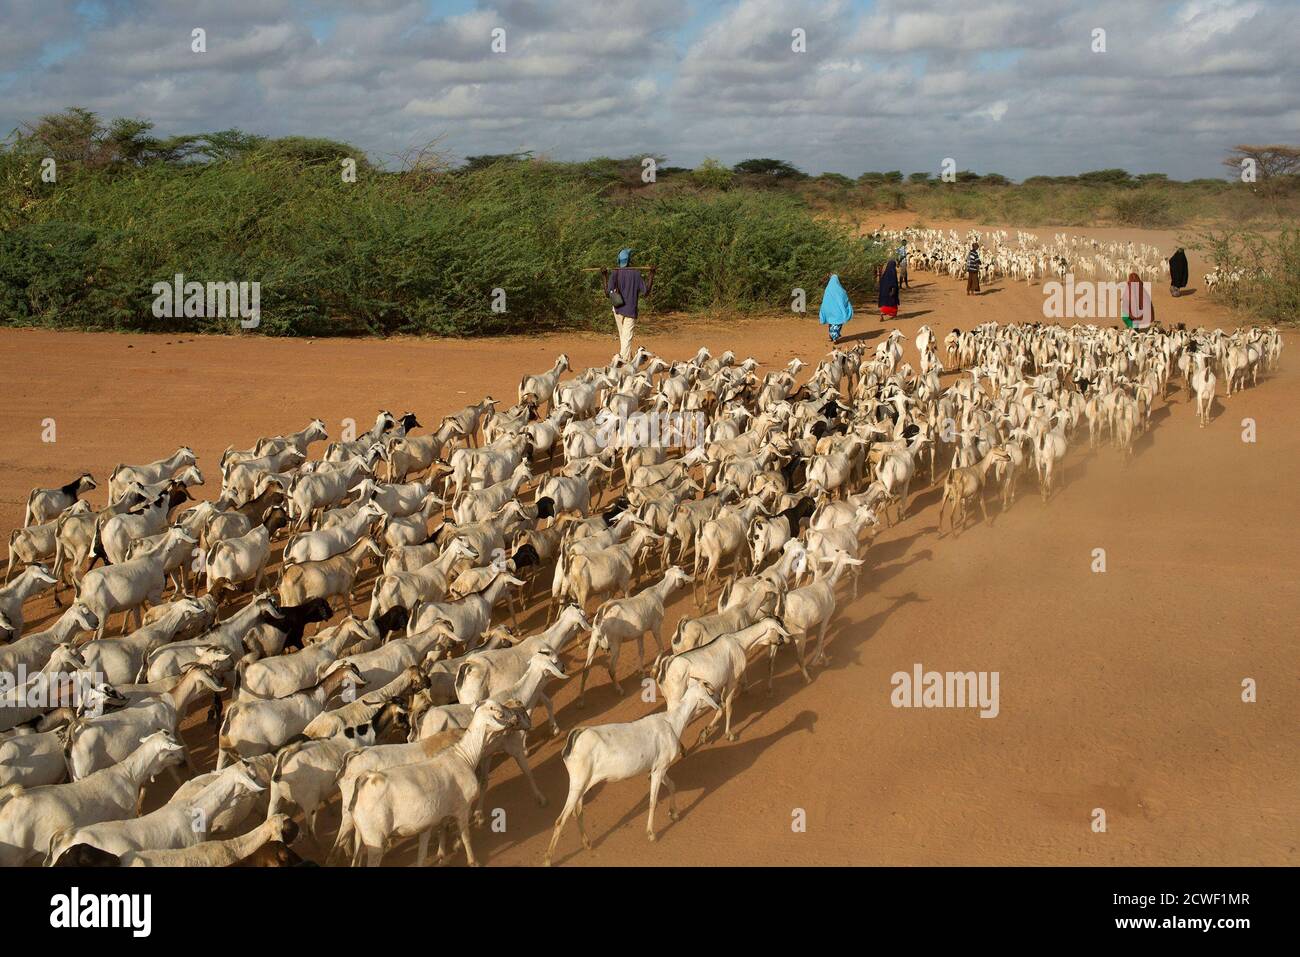 People herd livestock to a grazing ground in the early hours of the morning near Dagahale, one of several refugee settlements in Dadaab, Garissa County, northeastern Kenya October 9, 2013.  REUTERS/Siegfried Modola  (KENYA - Tags: SOCIETY ANIMALS) Stock Photo